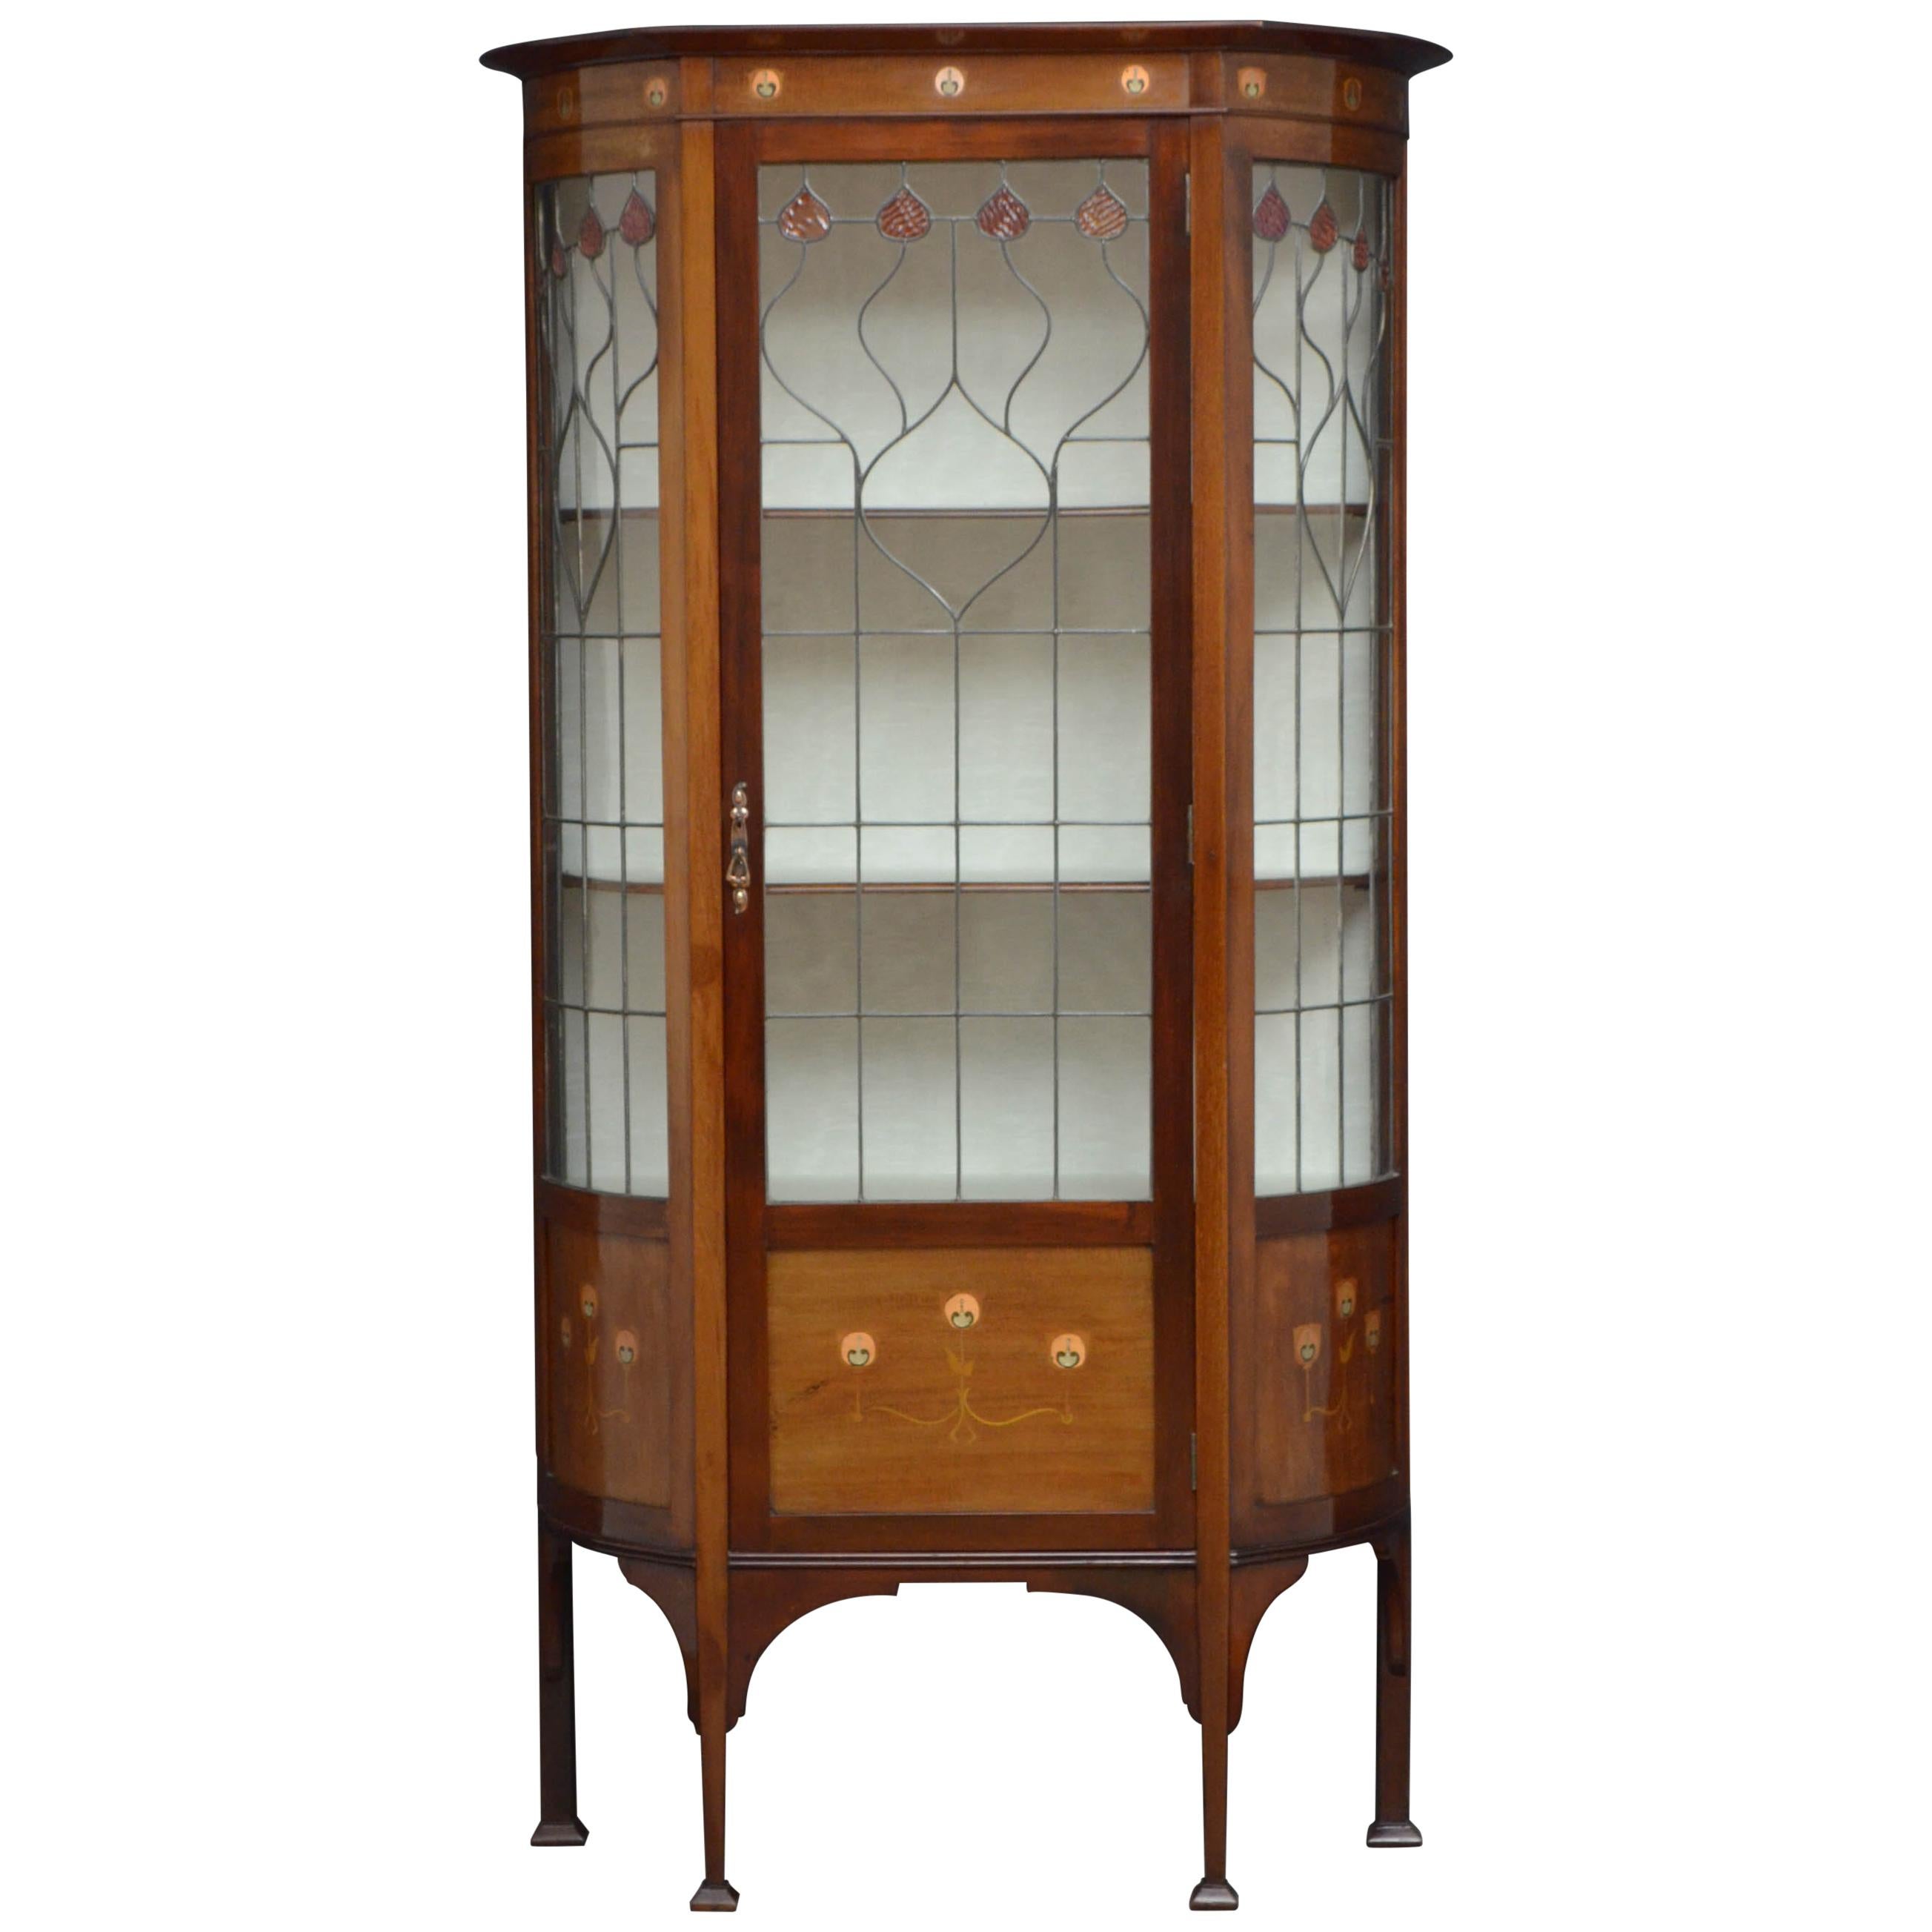 Immaculate Art Nouveau Display Cabinet